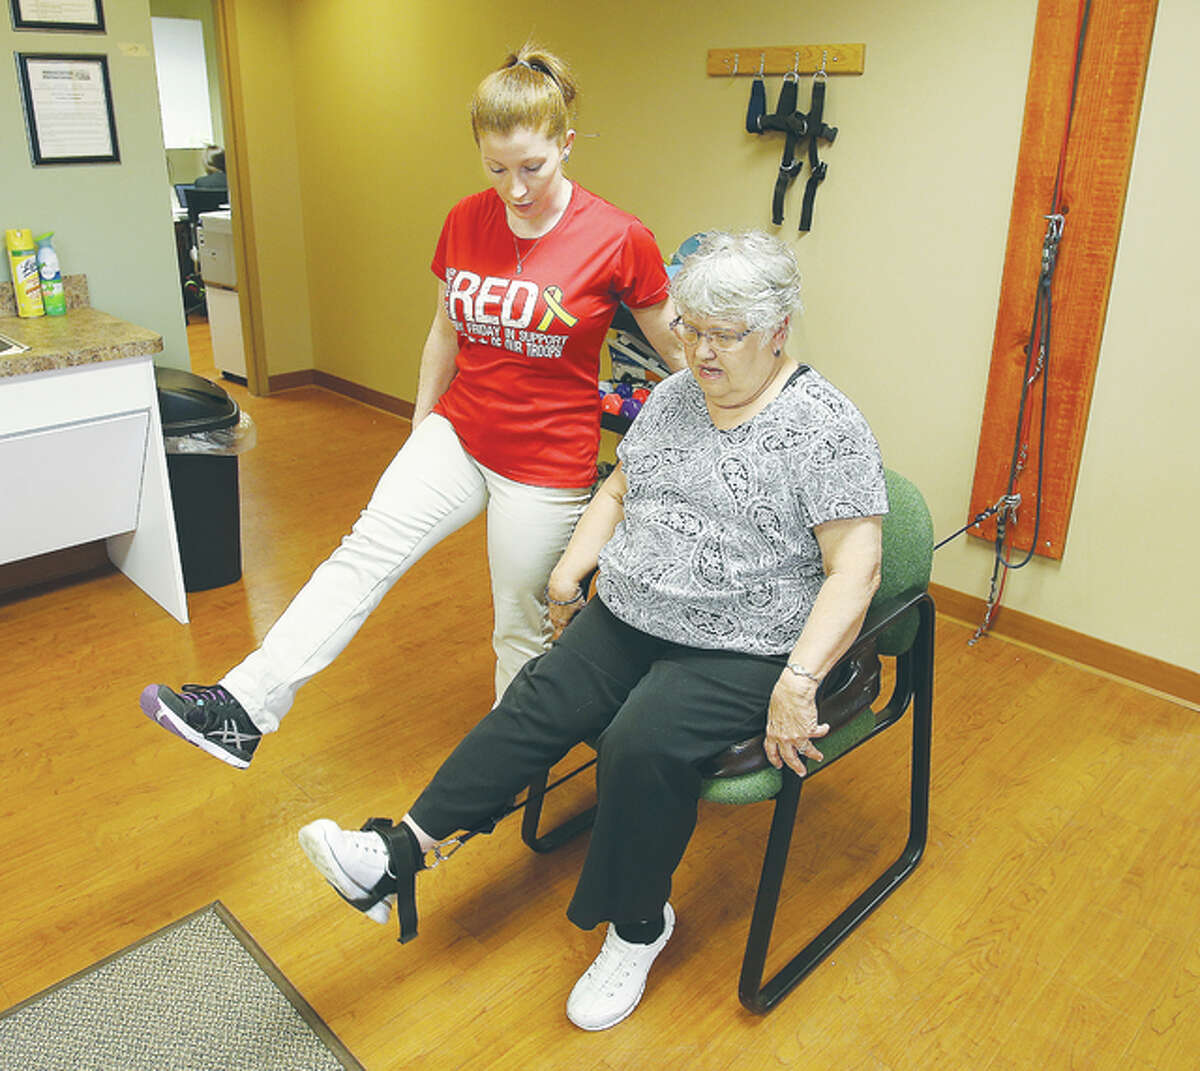 Physical therapy is a vital part of the treatment process at the Associated Physicians Group in Edwardsville. Here Physical Therapy Assistant Sara Aleandri, left, works with patient Bonnie Seitz to do leg lifting with an ankle weight.